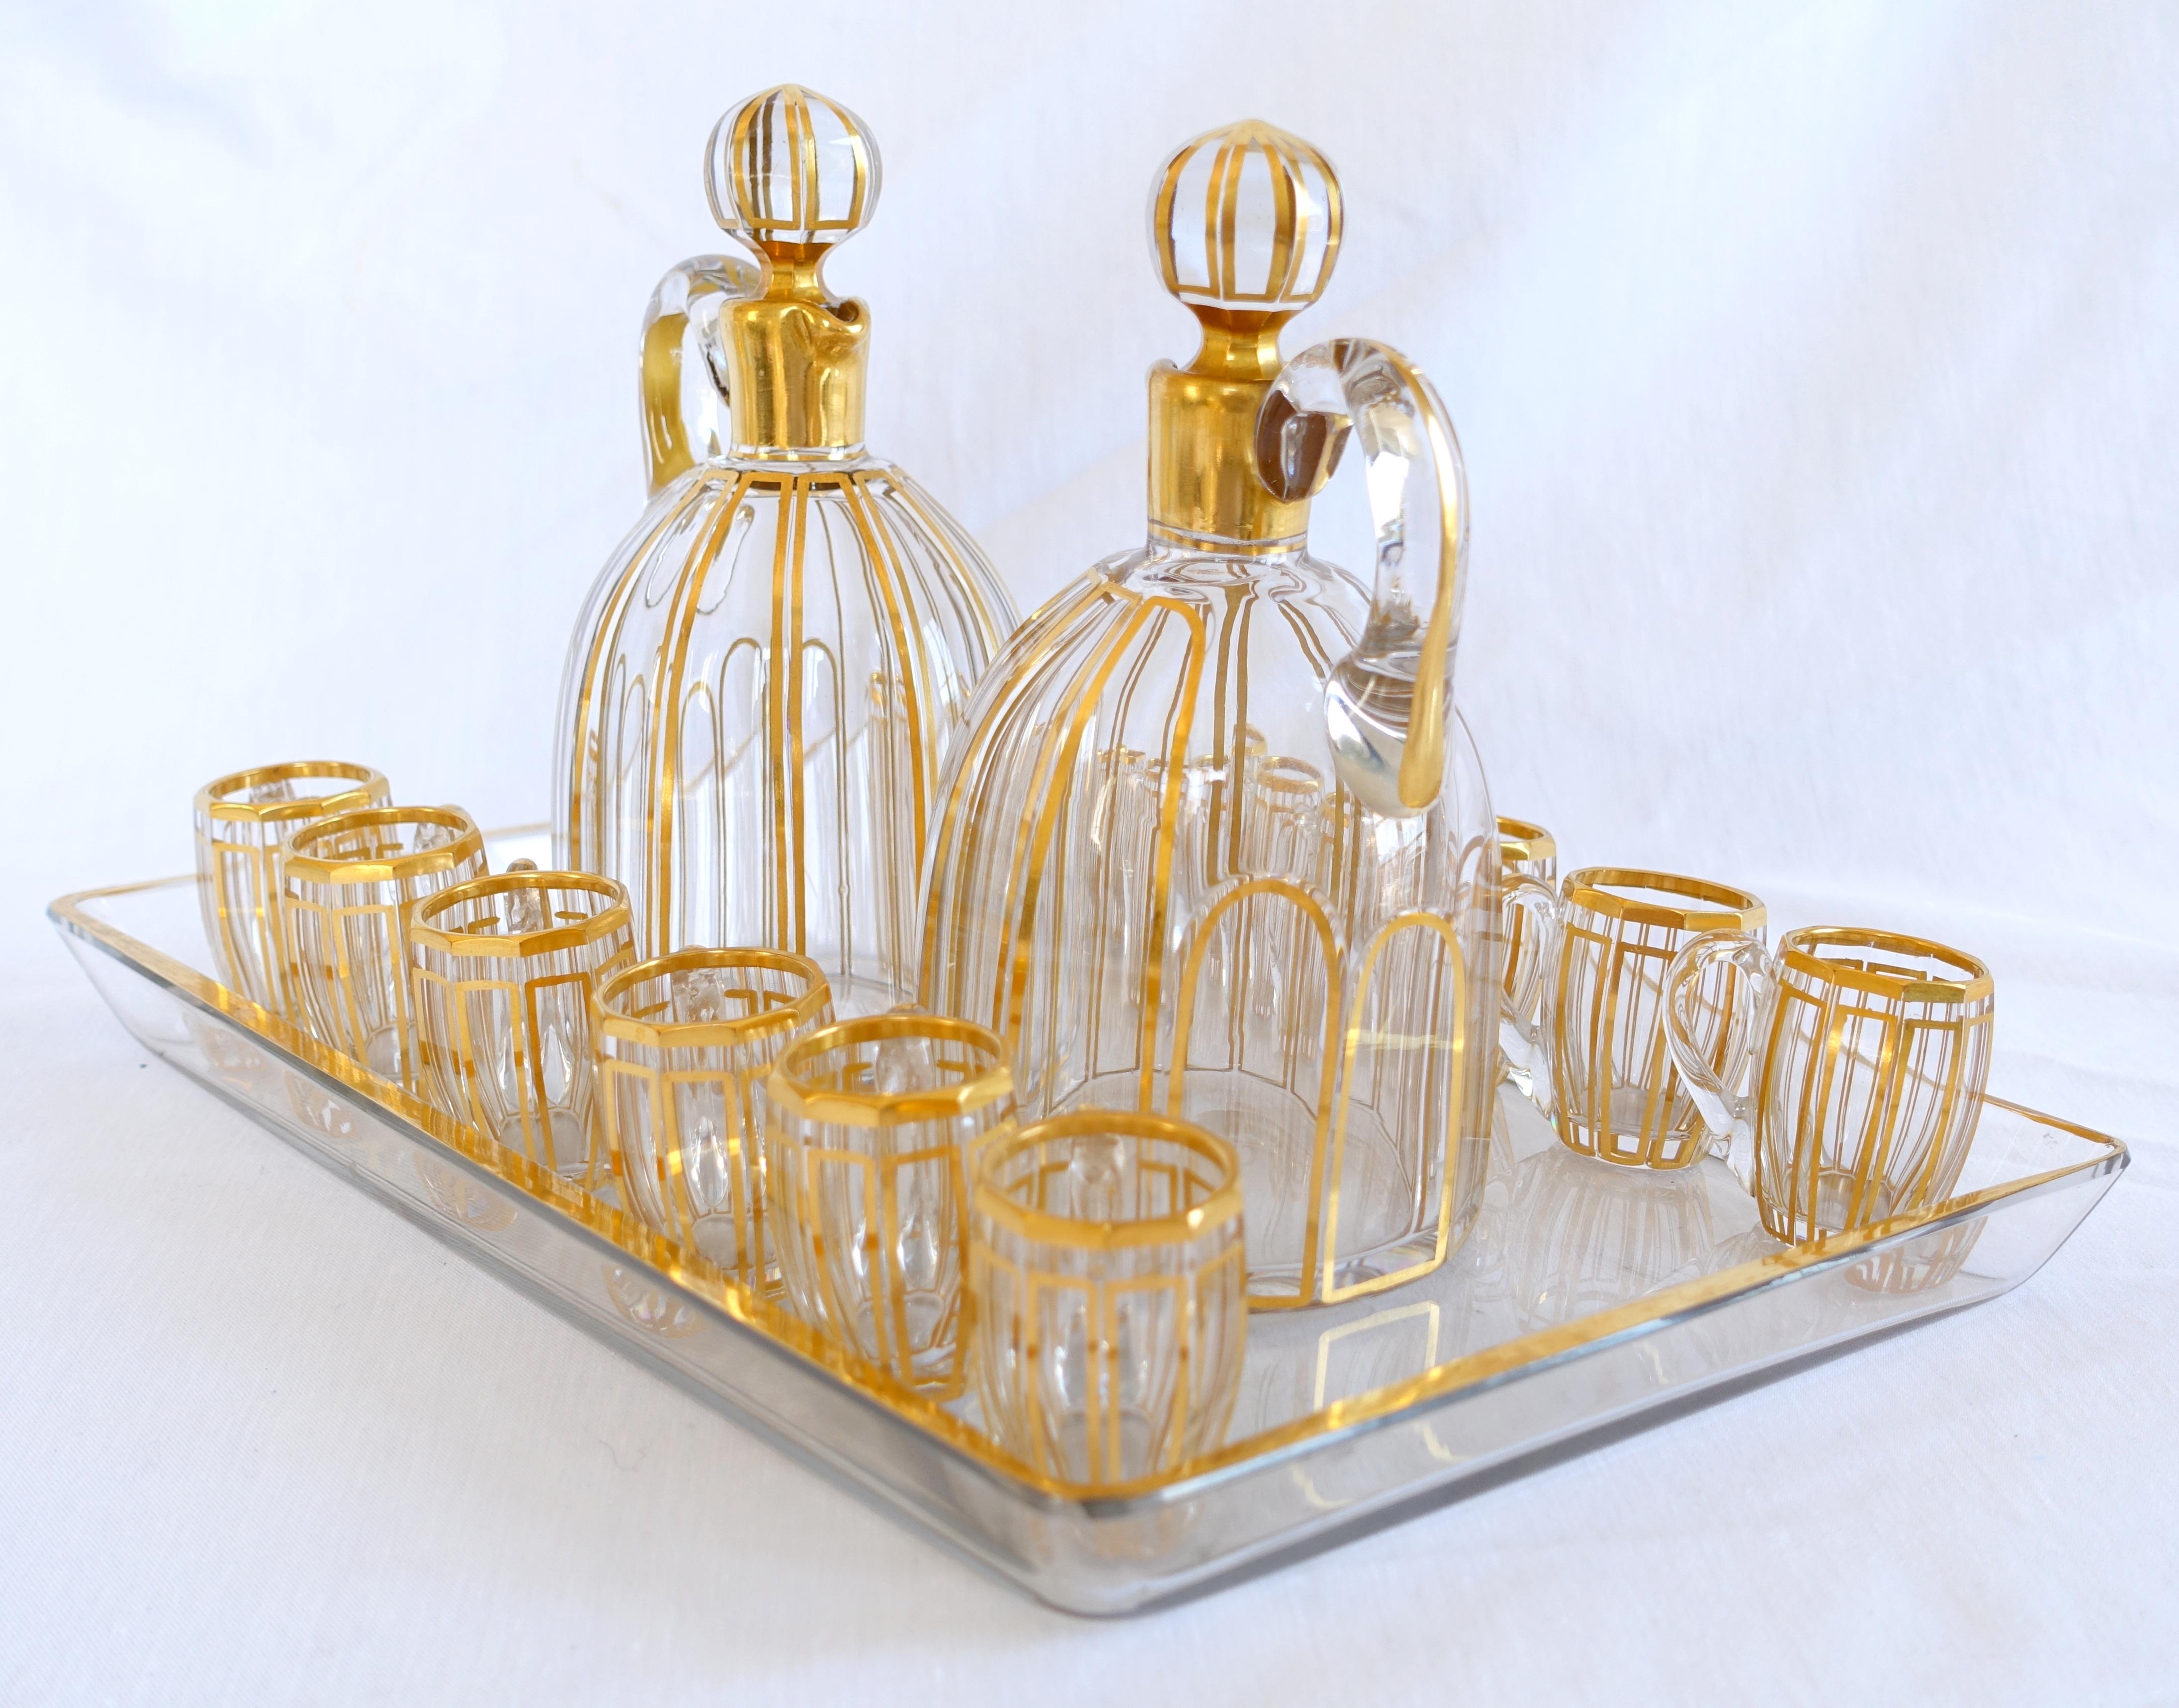 French Baccarat crystal liquor set for 12, Cannelures cut pattern enhanced with gold